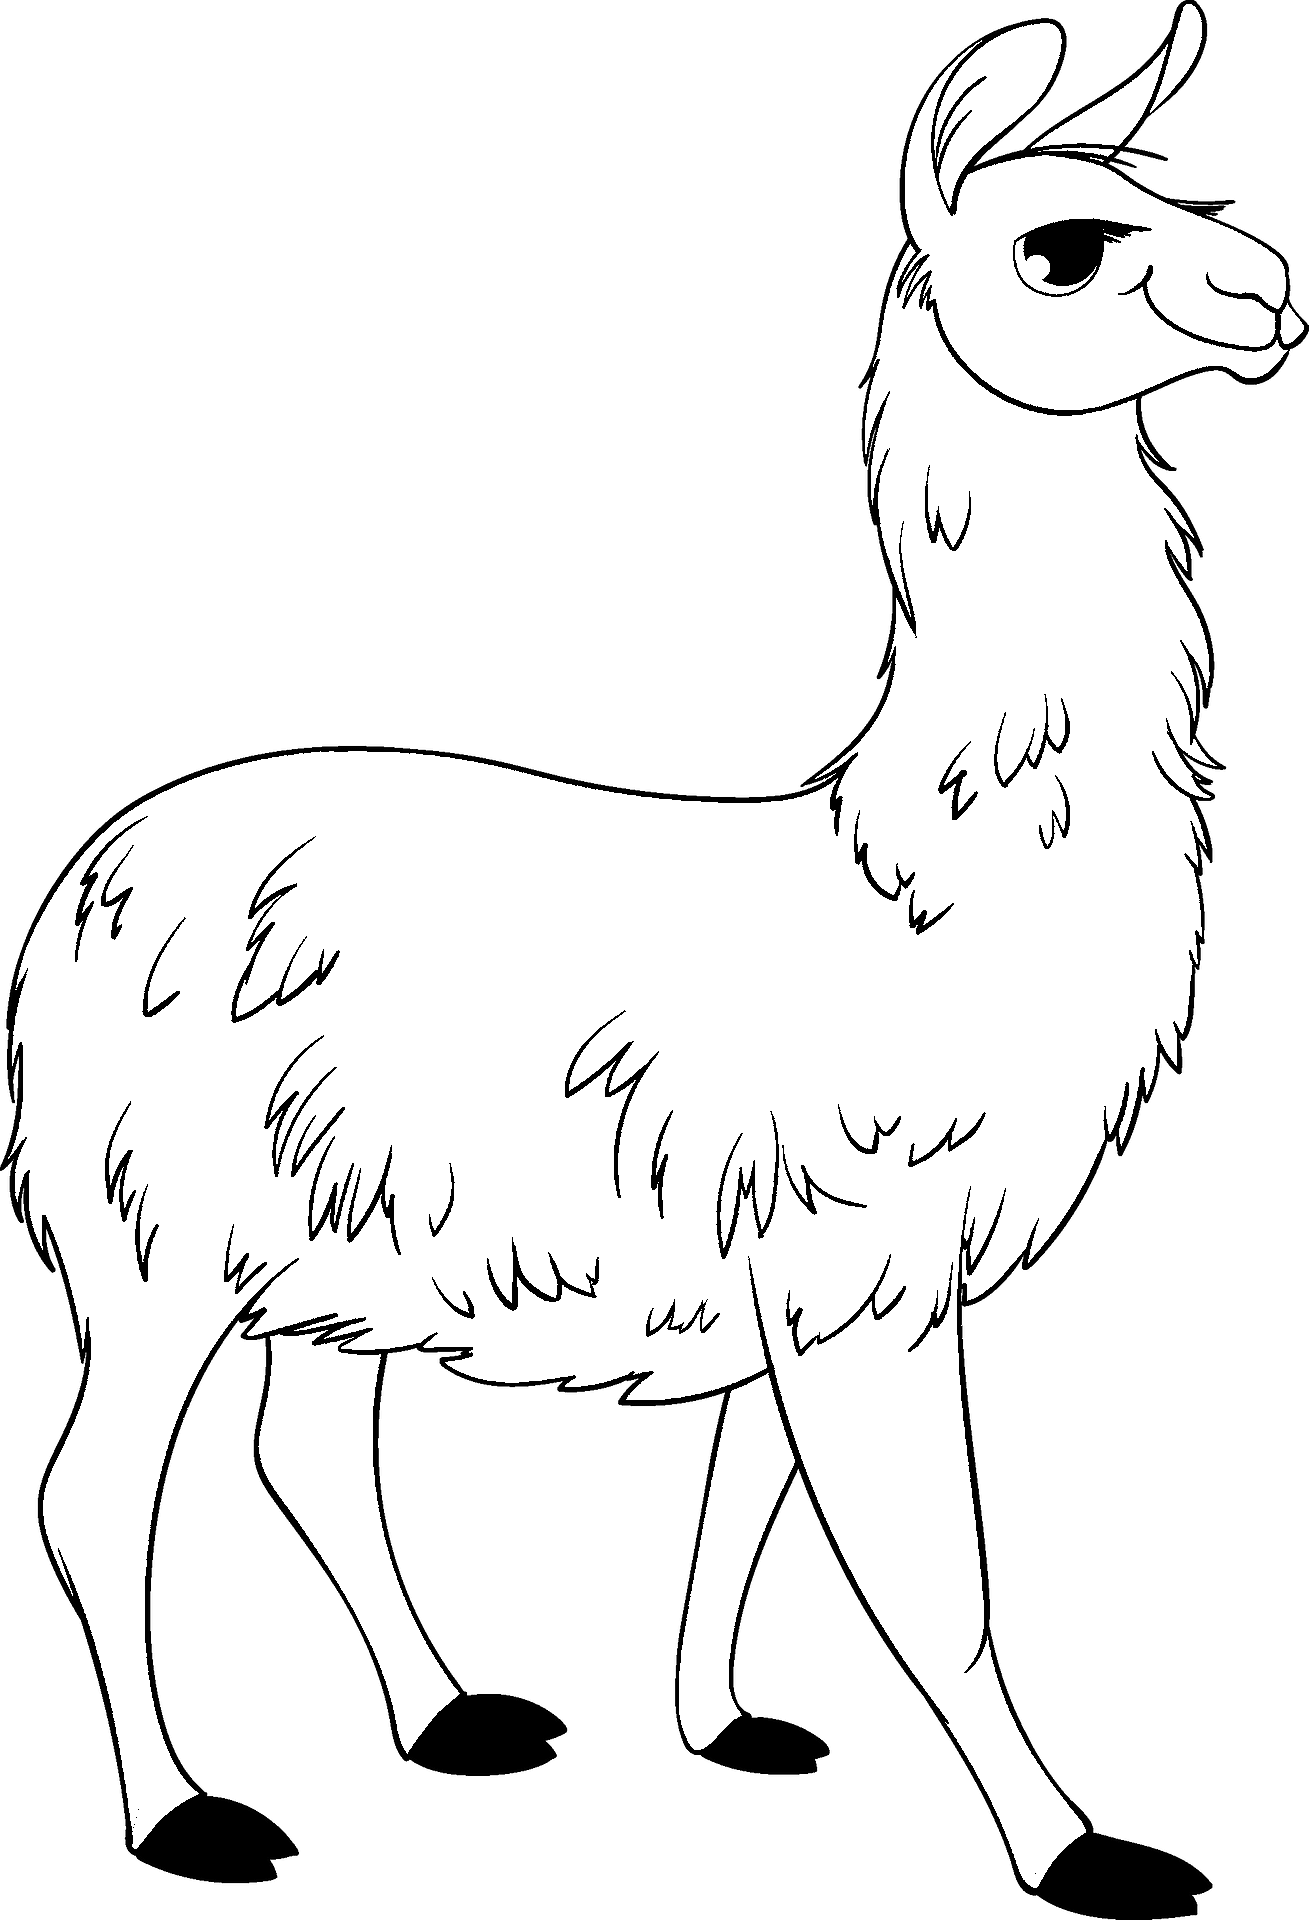 Coloring page of an alpaca